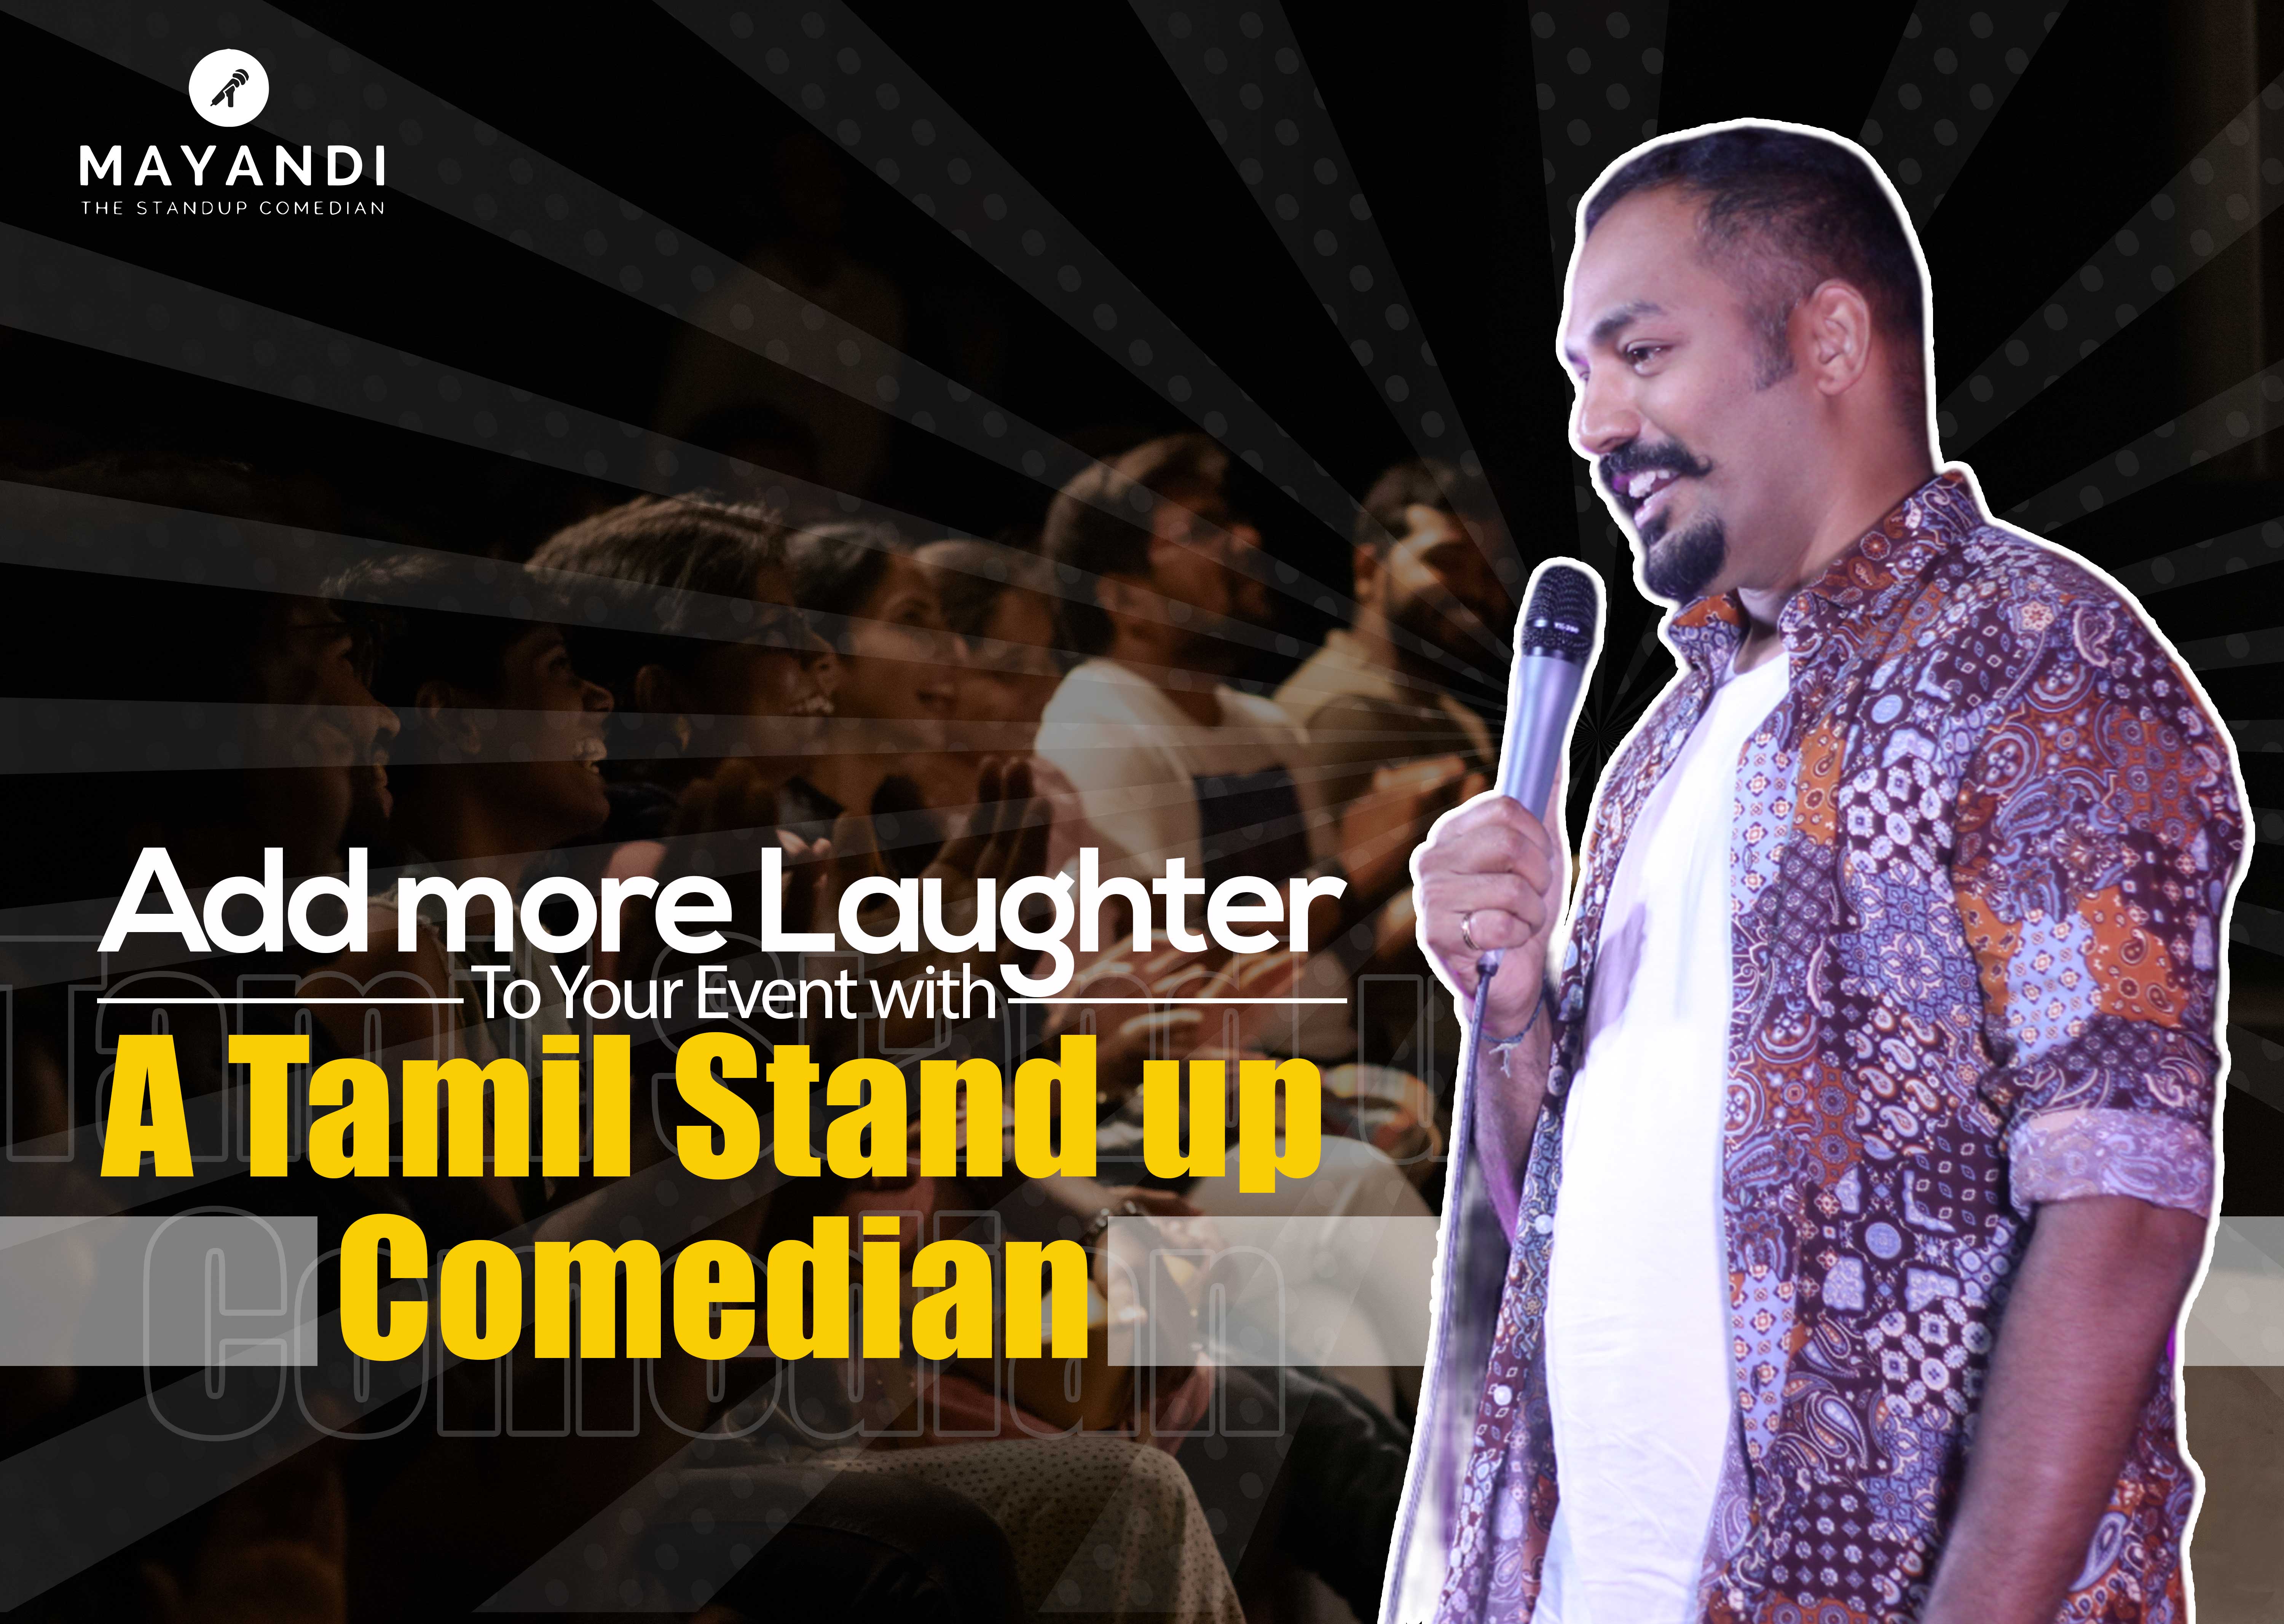 Add More Laughter to Your Event with a Tamil Standup Comedian!